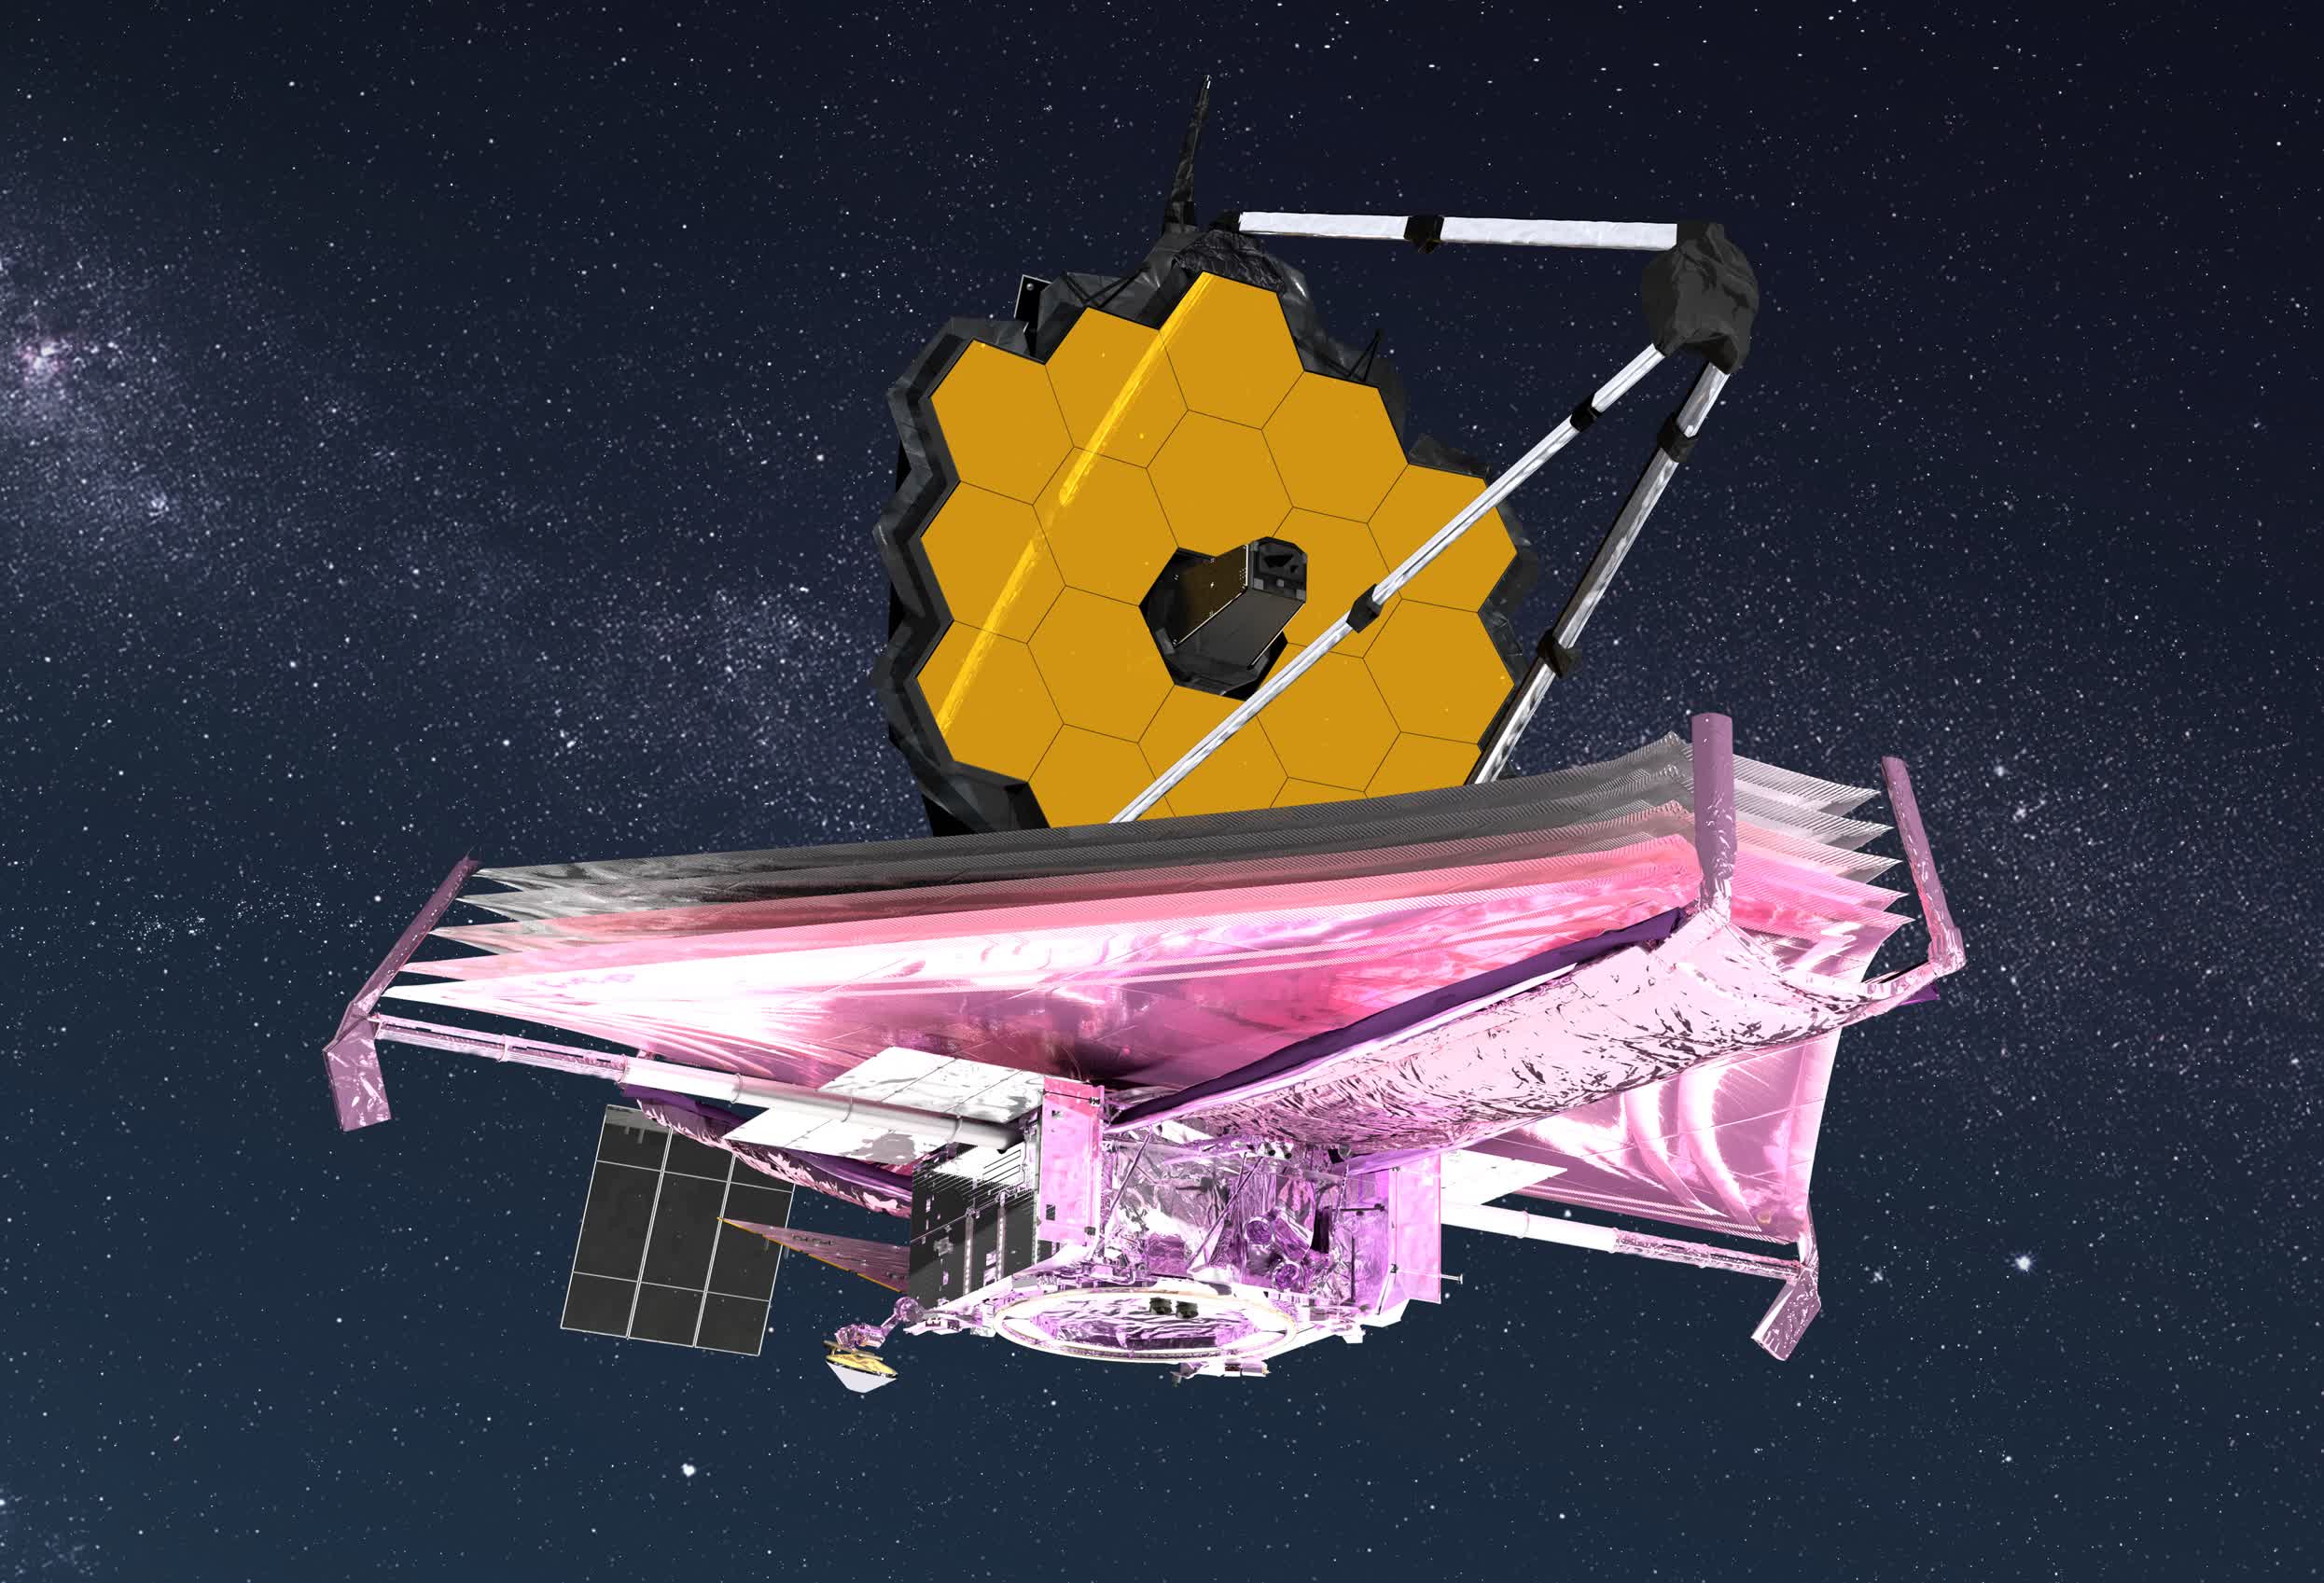 NASA gives the James Webb Telescope a clean bill of health following prep incident